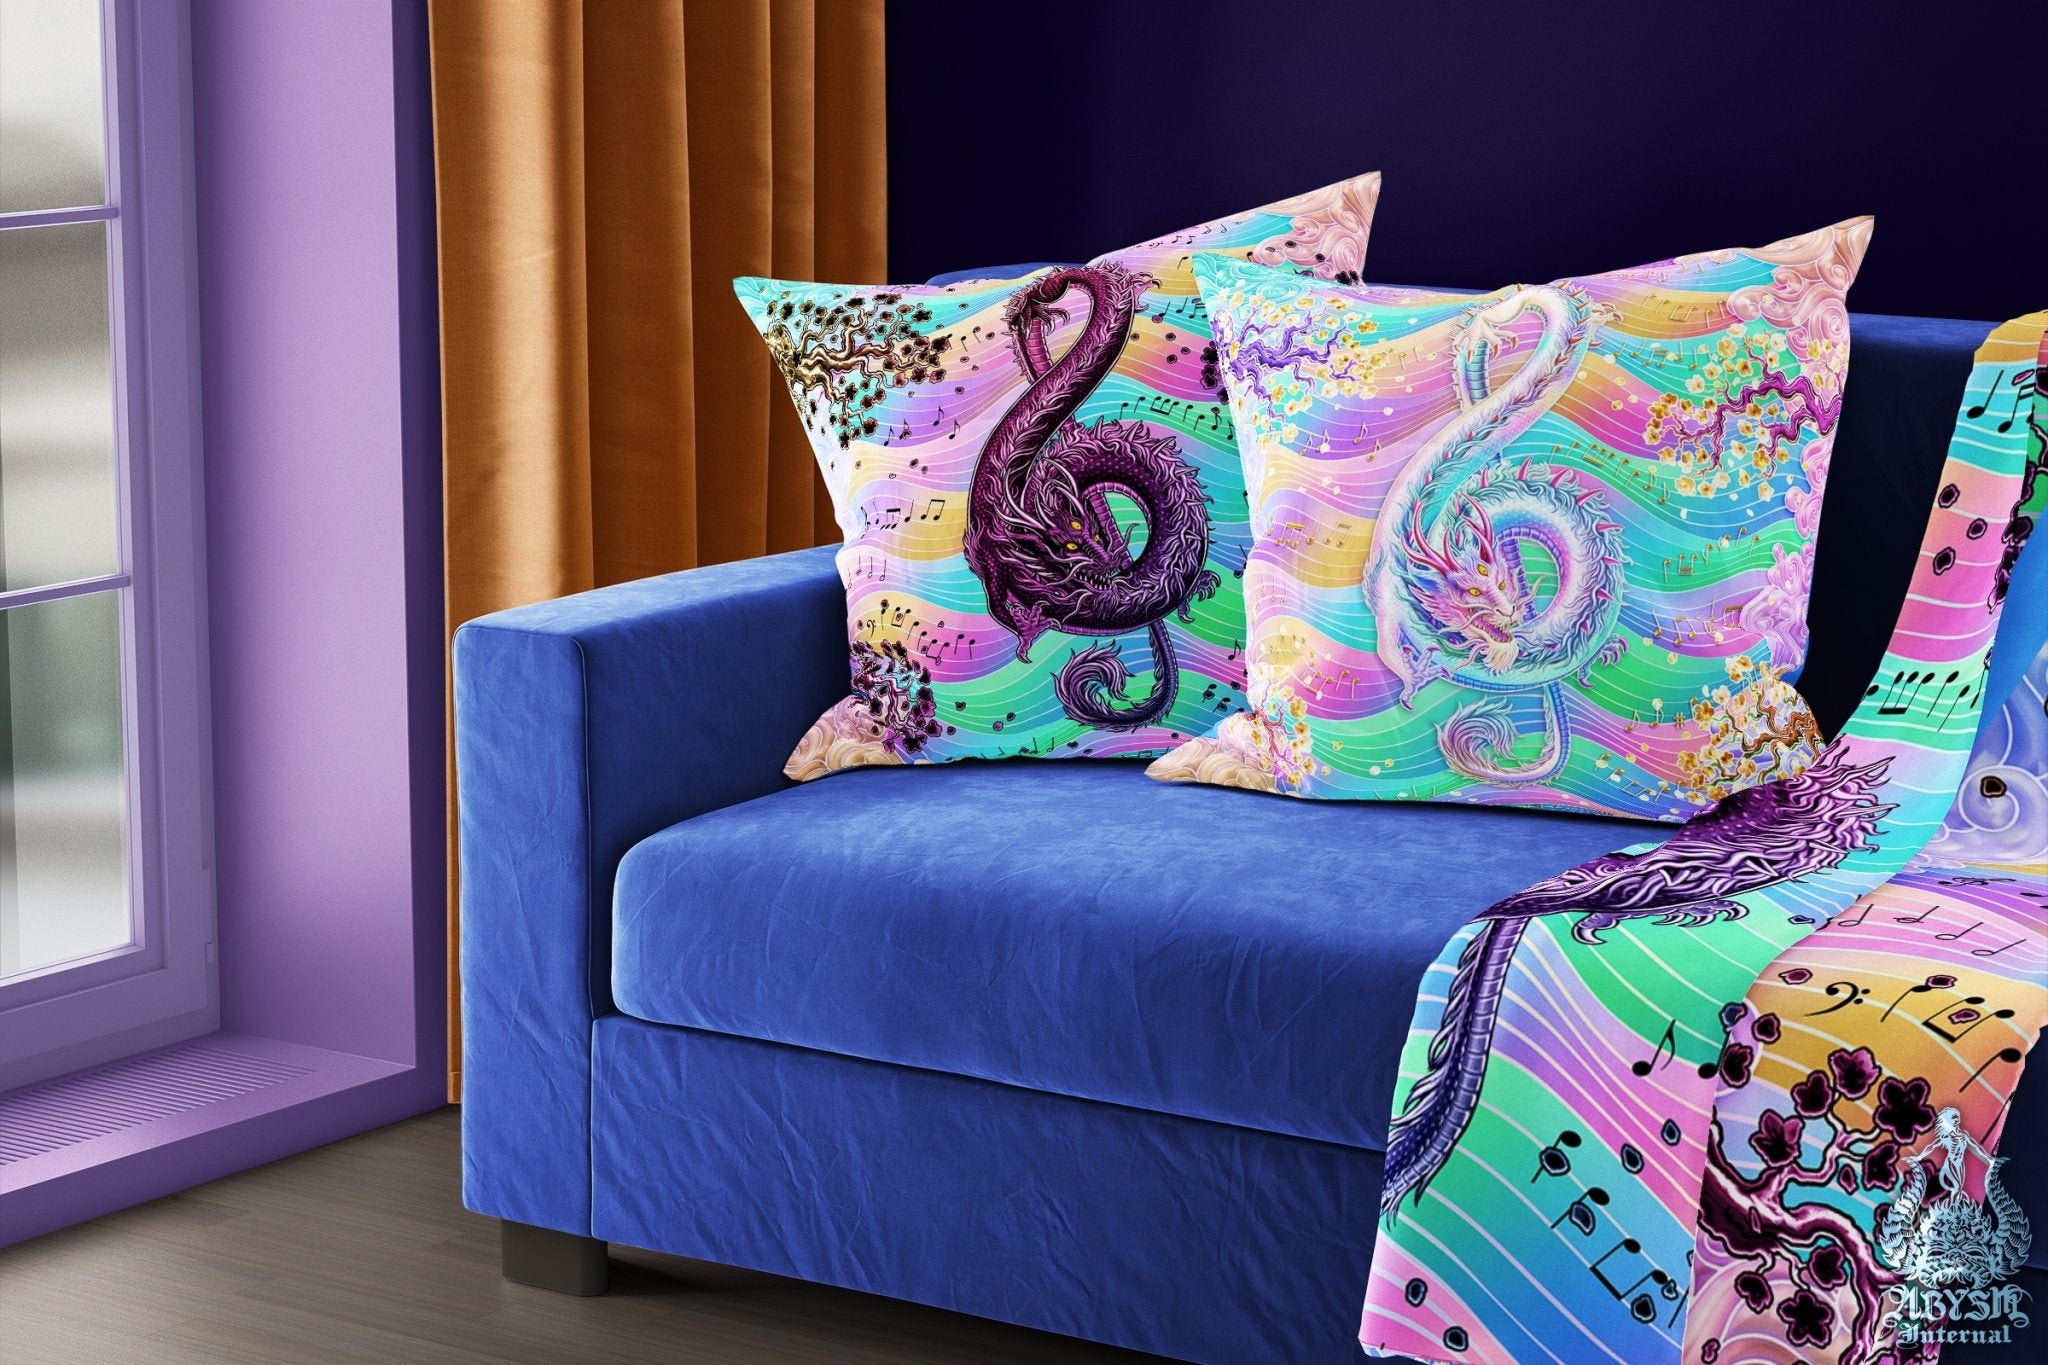 Music Throw Pillow, Decorative Accent Cushion, Psychedelic Room Decor, Black Dragon Art, Funky and Eclectic Home - Treble Clef, Pastel Punk - Abysm Internal